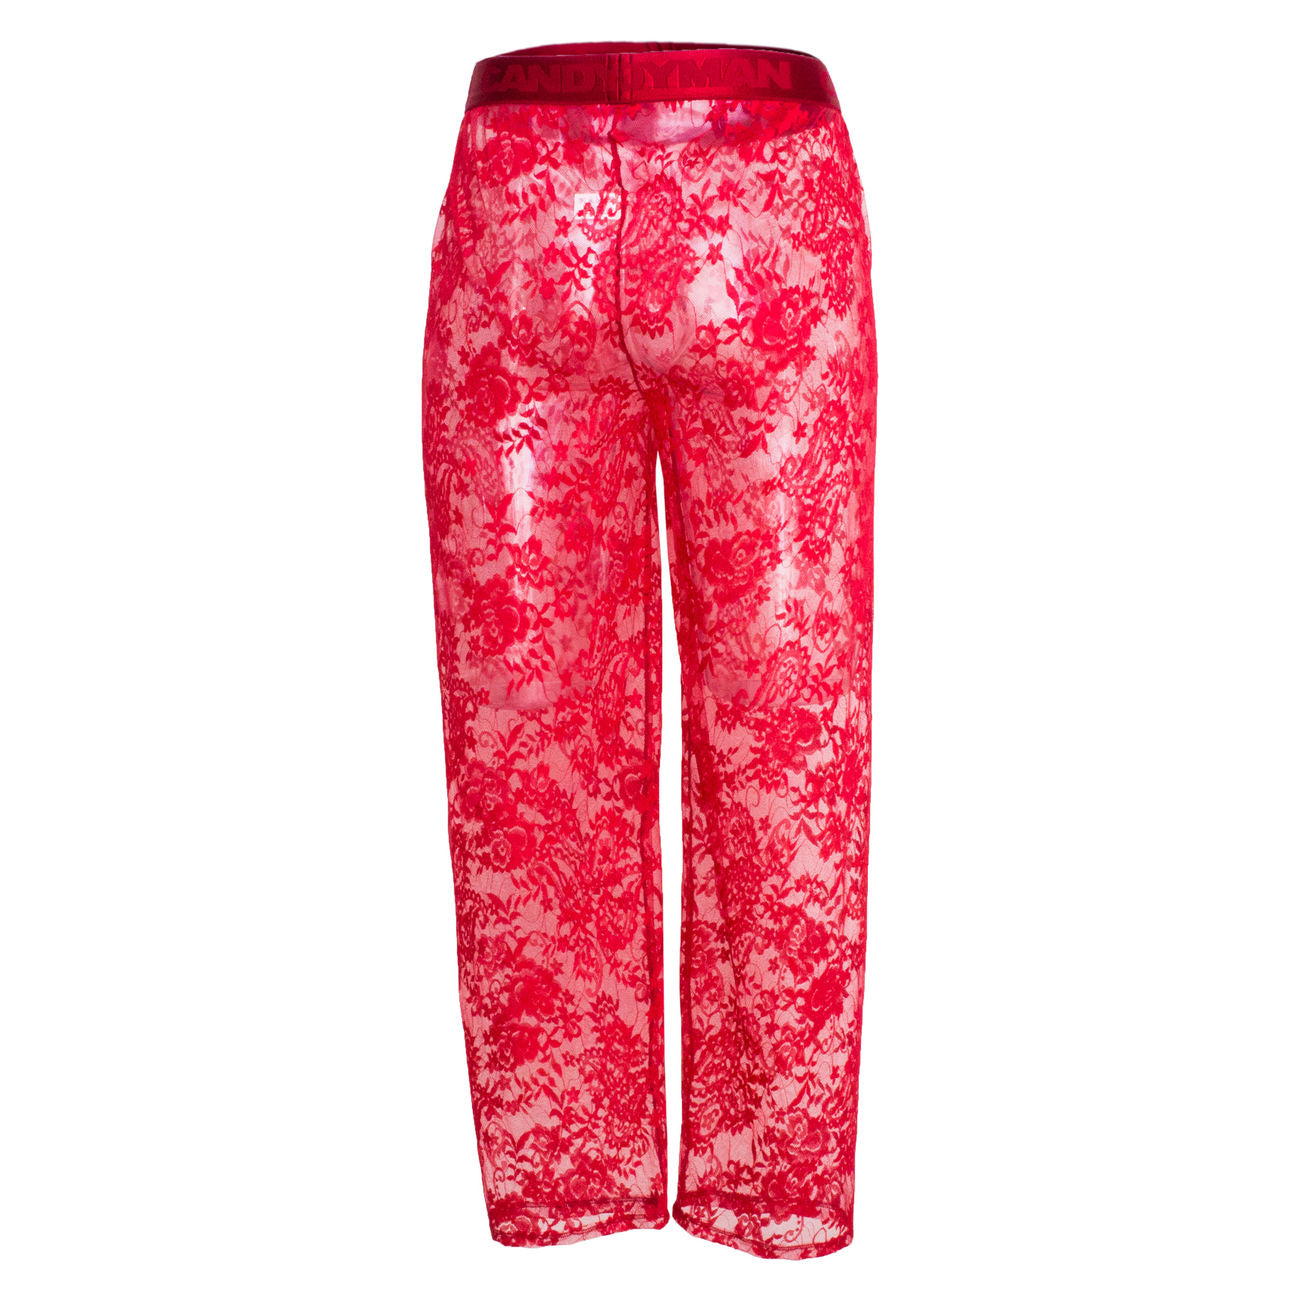 CandyMan 99234 Pants Color Red